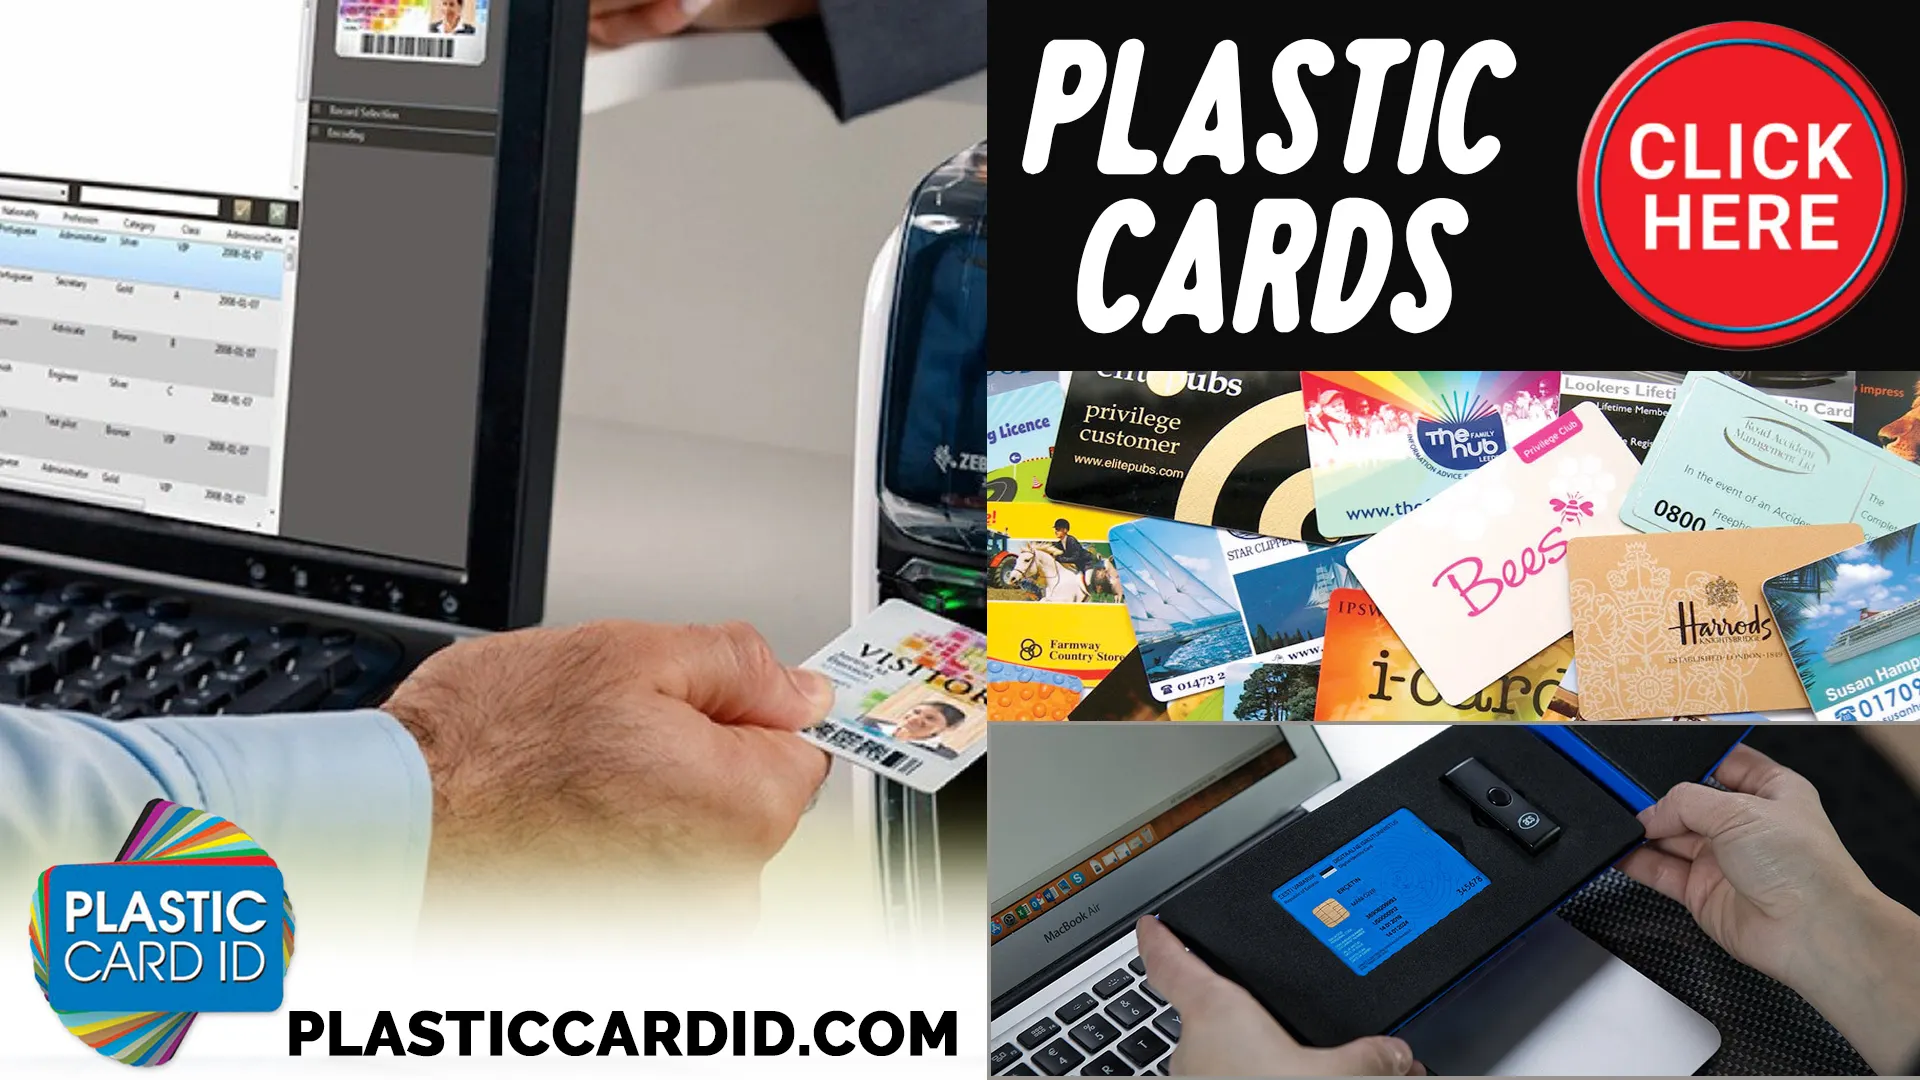 Enhance Your Plastic Card Security with PCID



